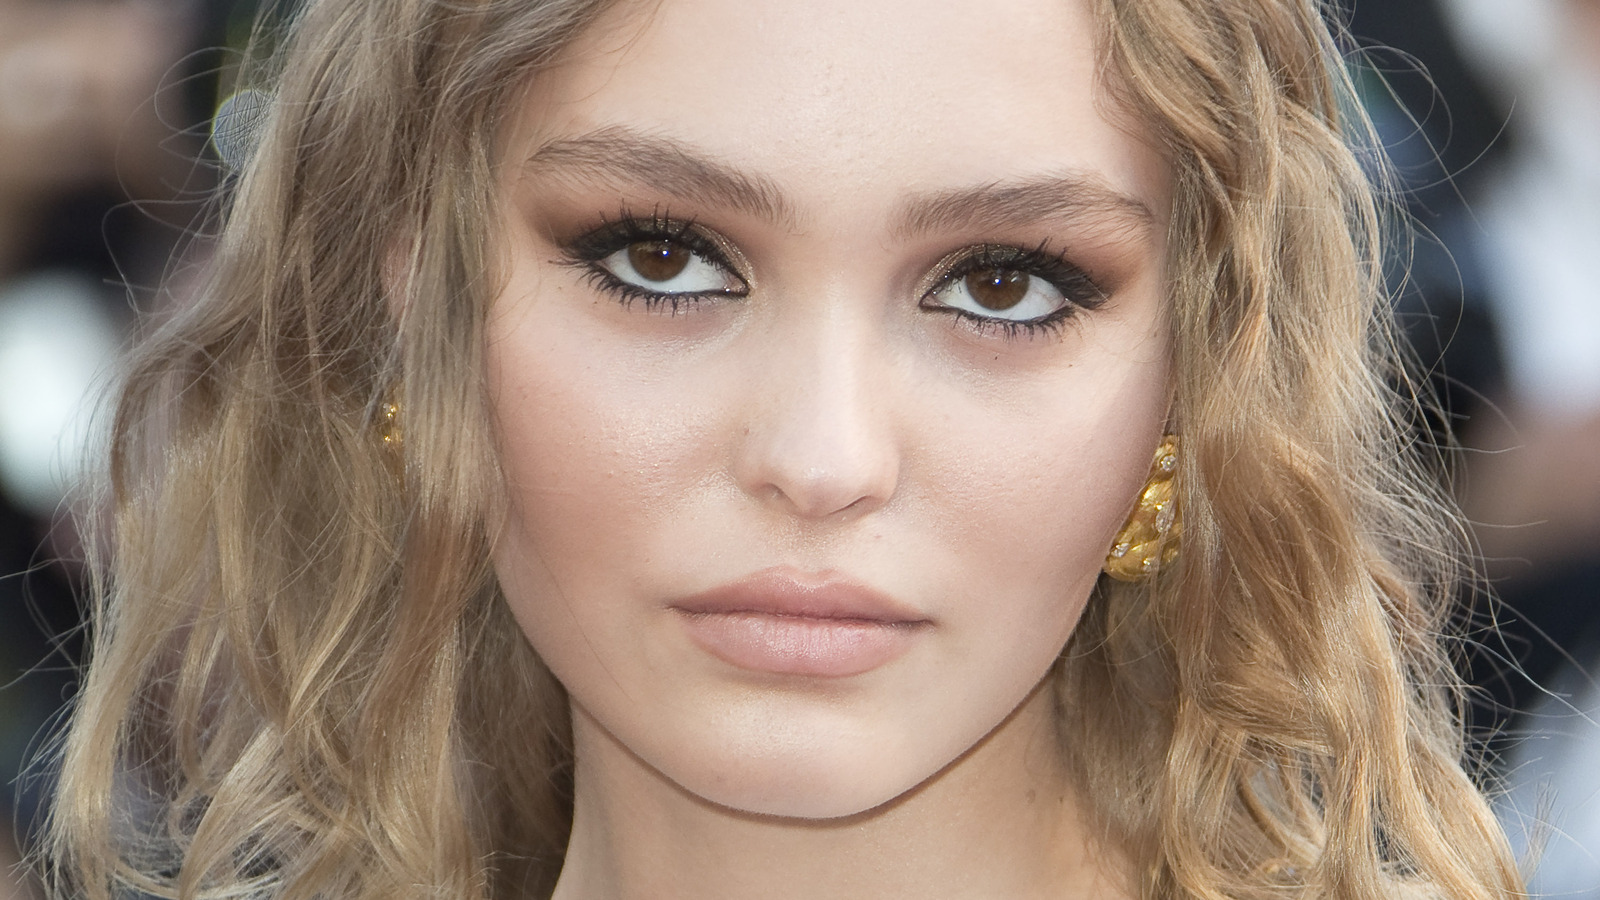 How To Recreate Lily-Rose Depp's Smoky Eye In 3 Easy Steps, According To  Her Makeup Artist